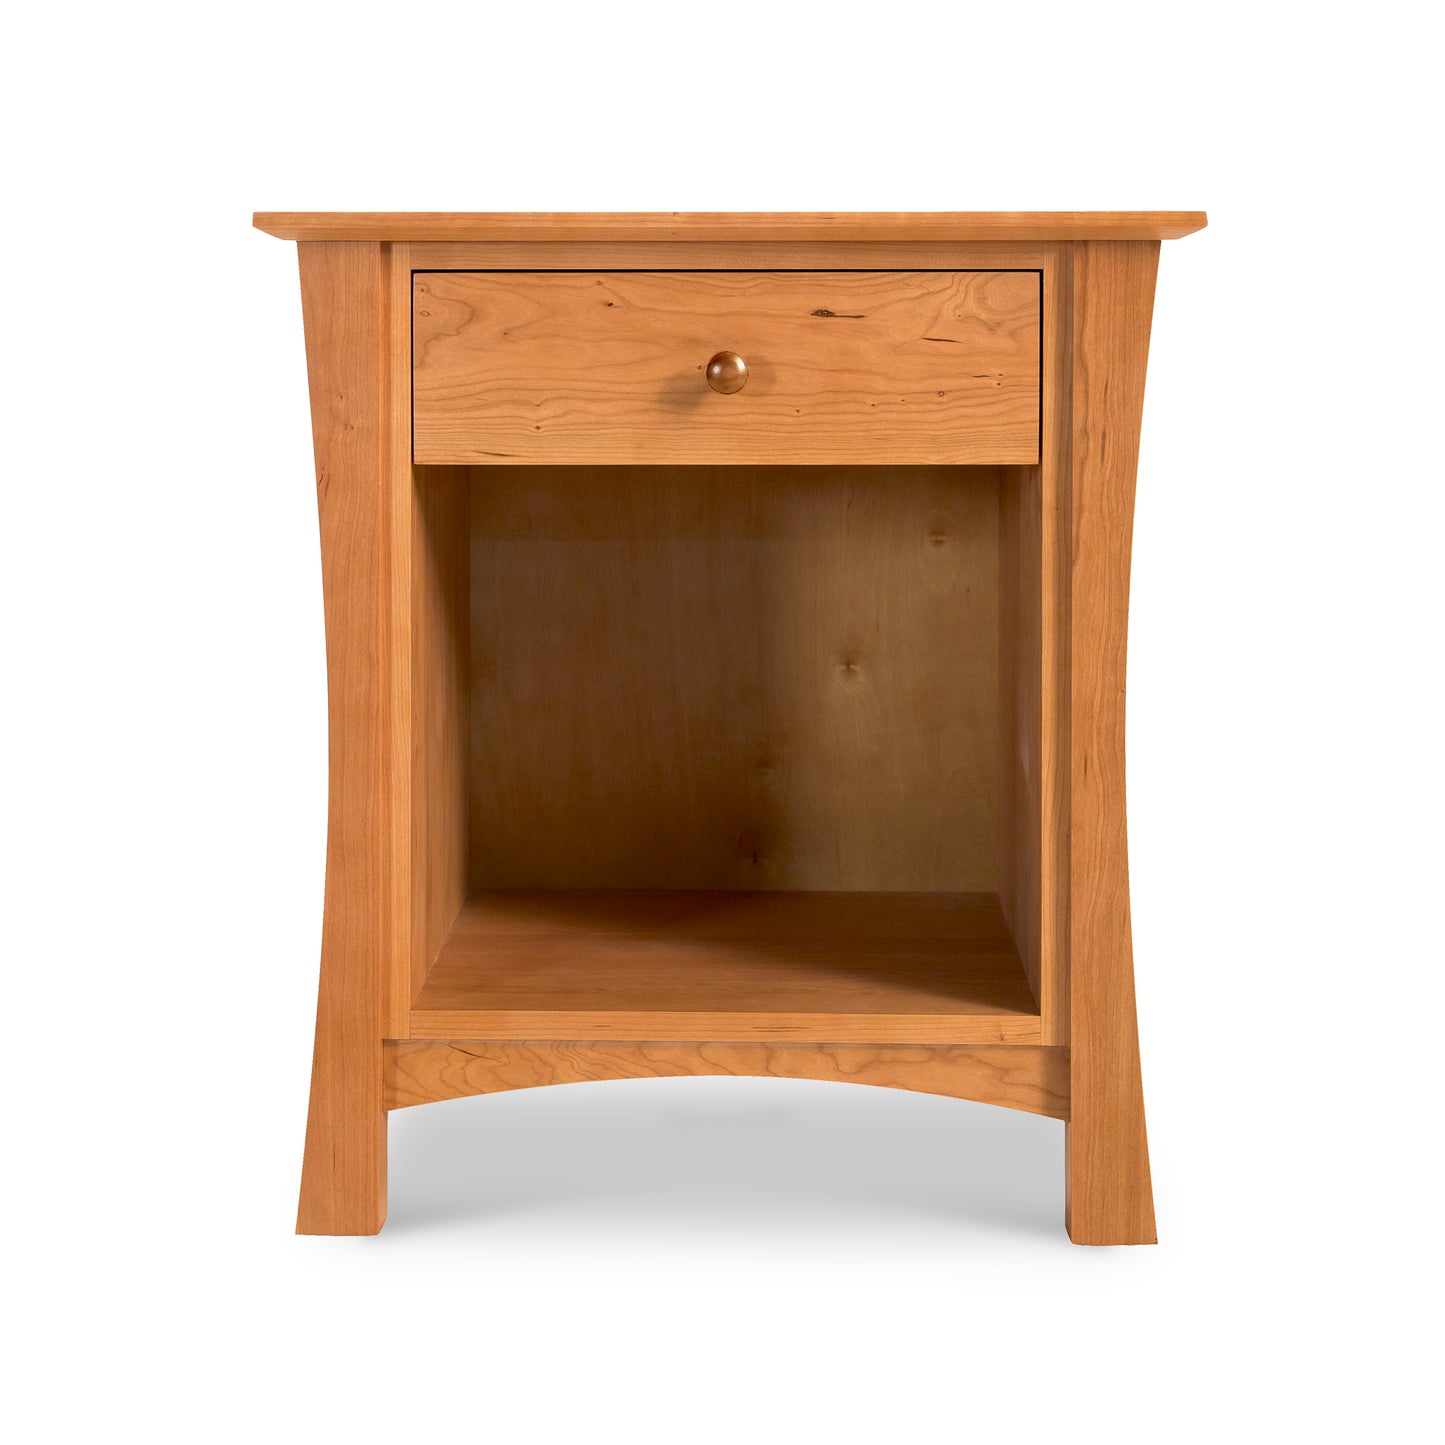 A Lyndon Furniture Andrews 1-Drawer Enclosed Shelf Nightstand, providing storage space.